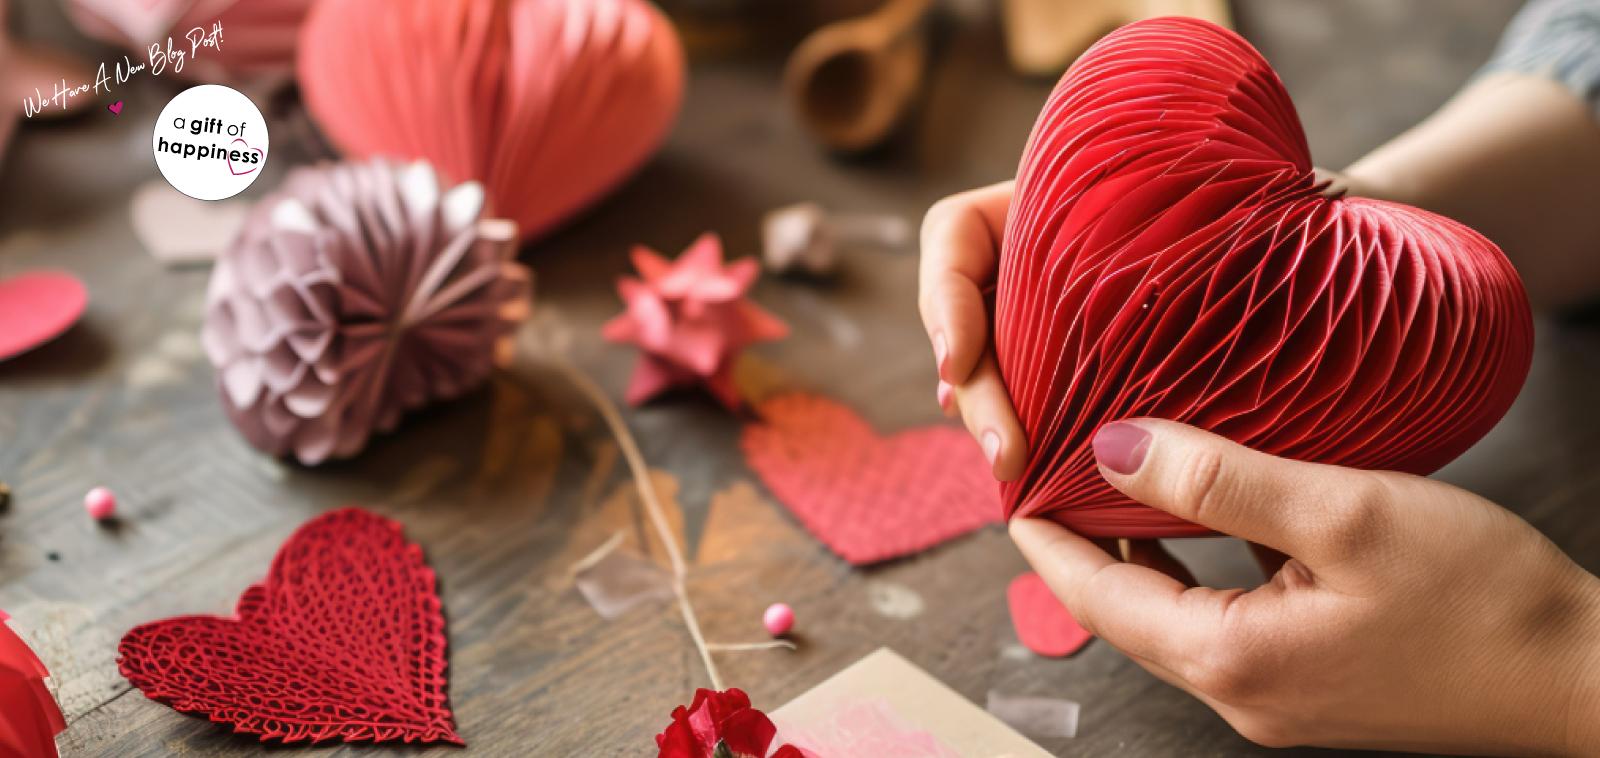 Valentine's Day: 8 Unique DIY Gift Ideas - A Gift of Happiness